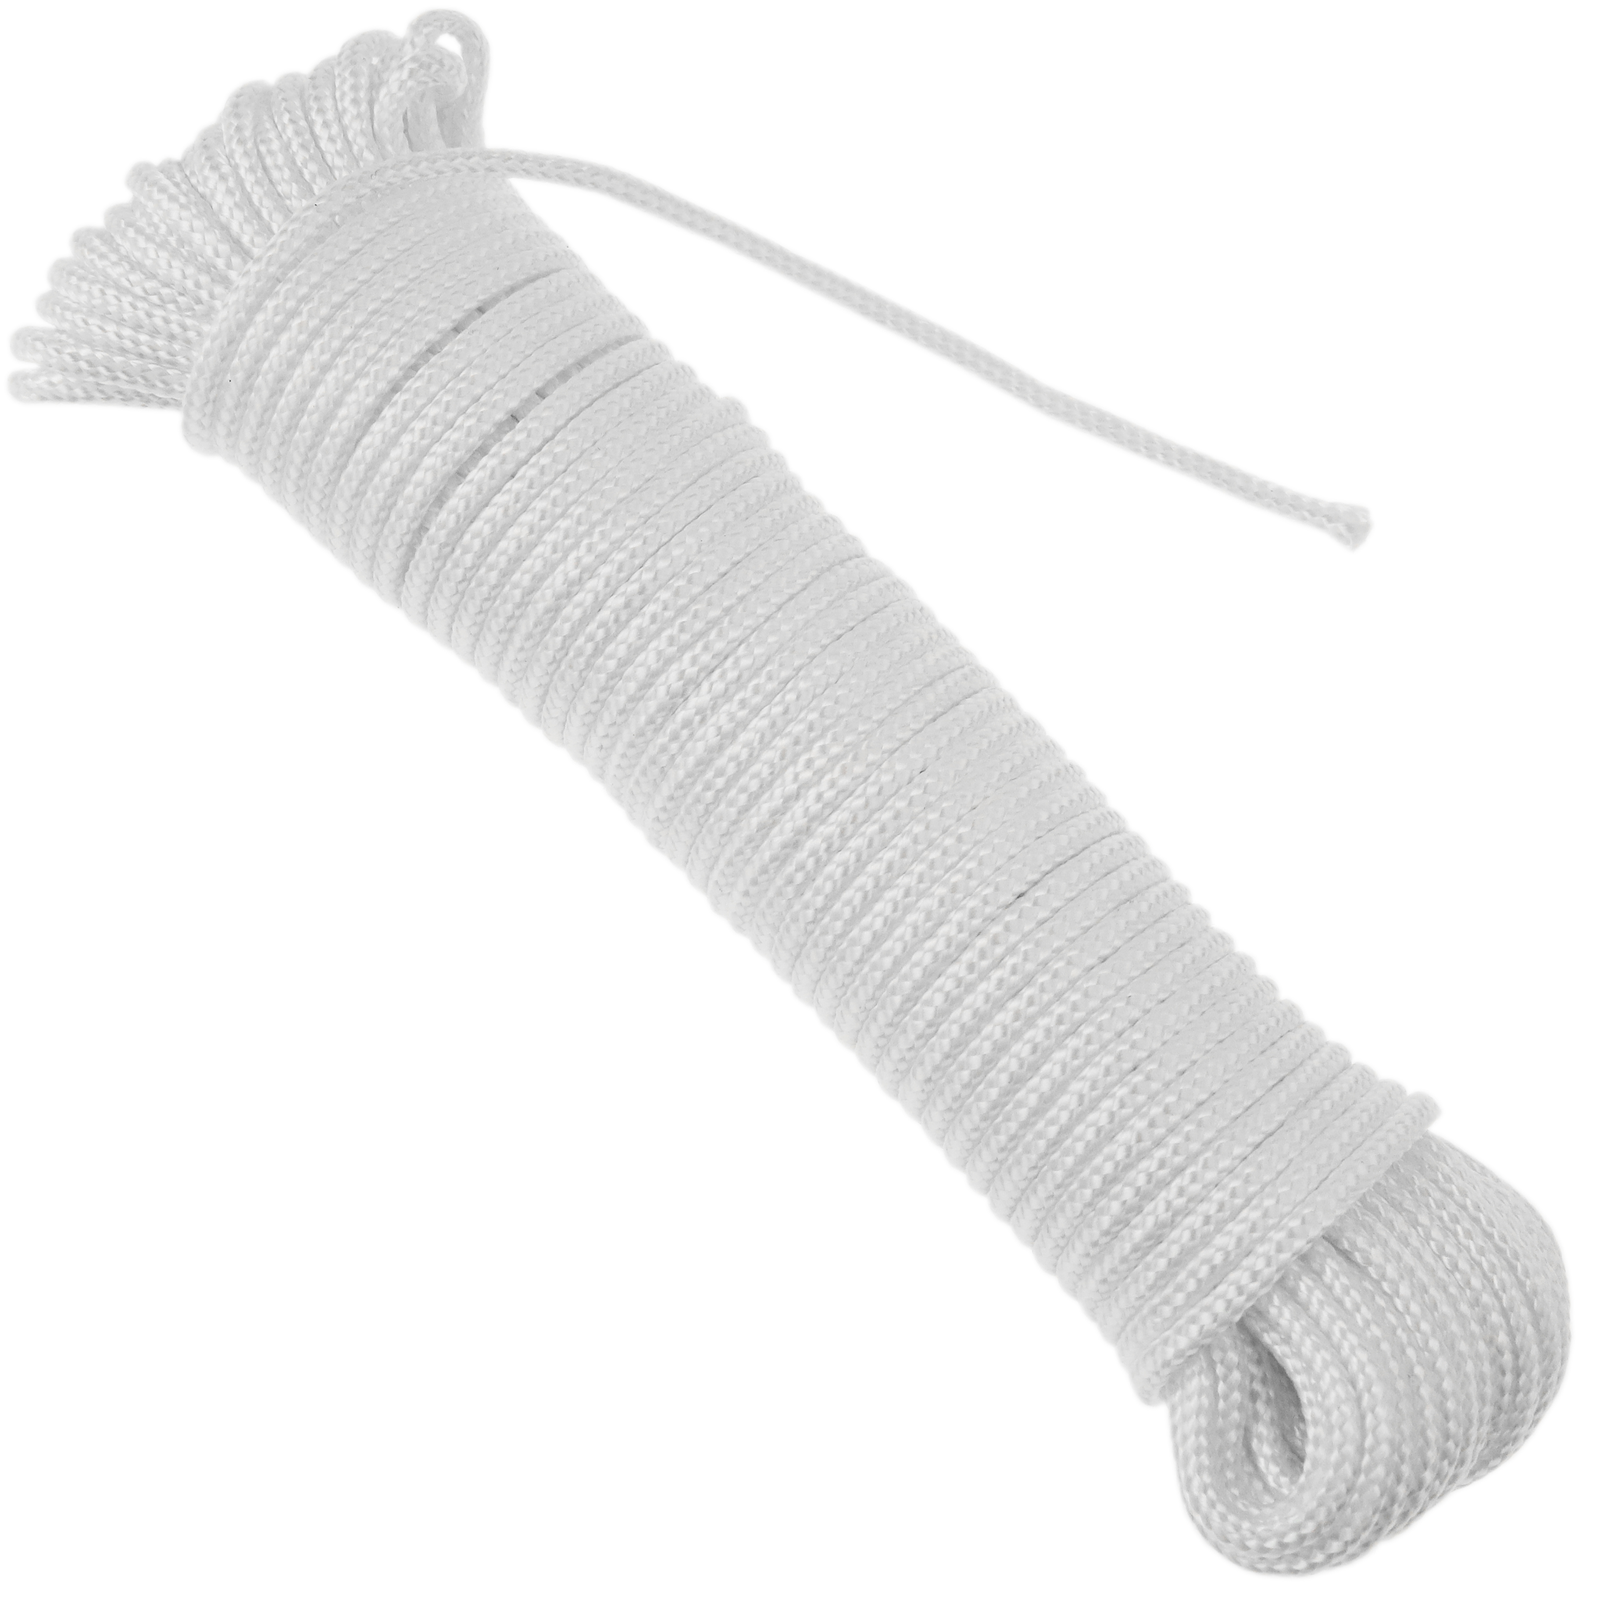 Braided polyester rope 10 m x 3 mm white